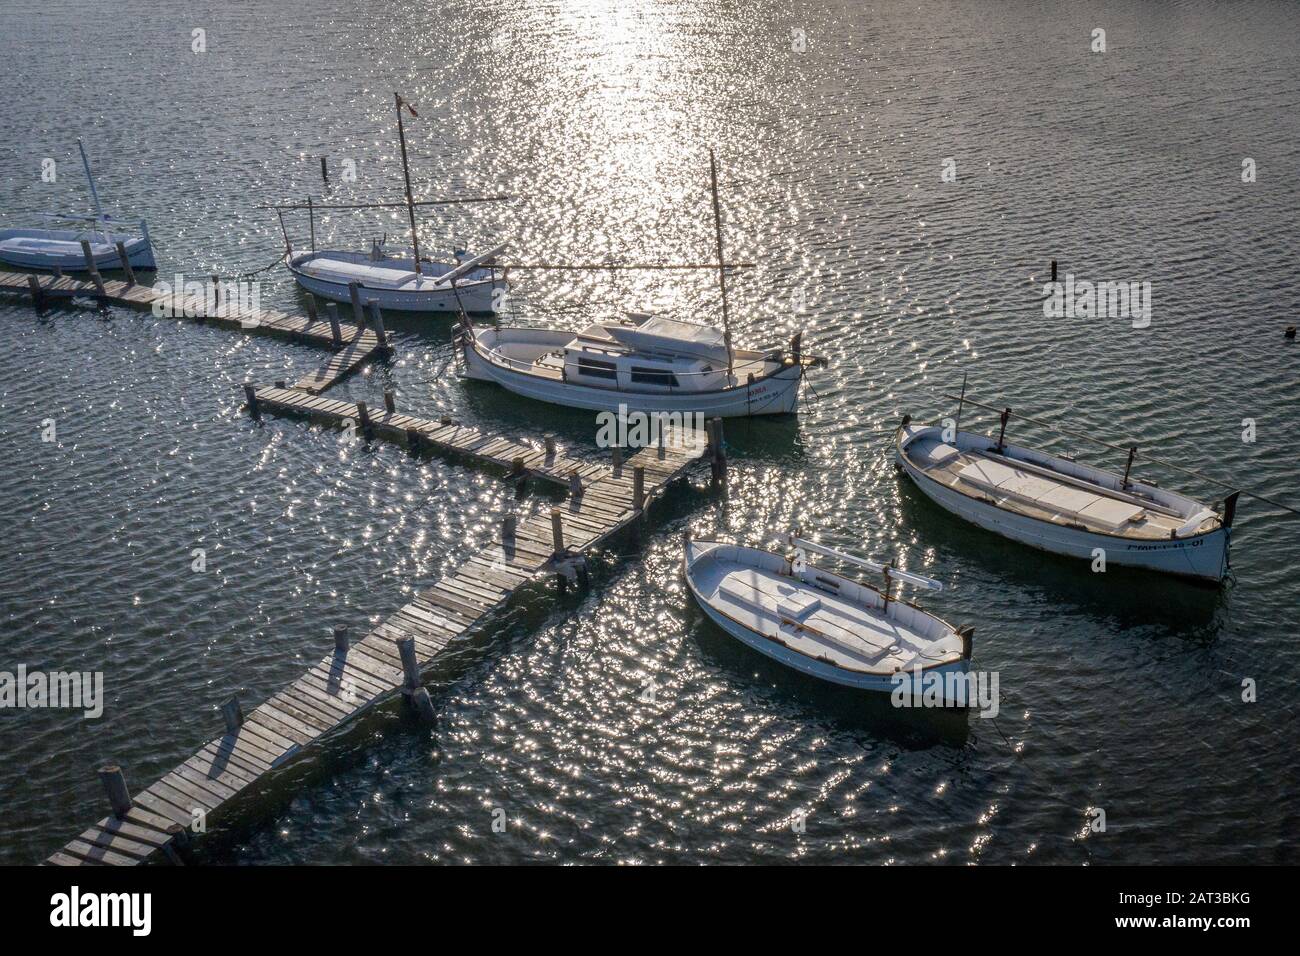 Aerial image of spanish fishing boats moored Stock Photo